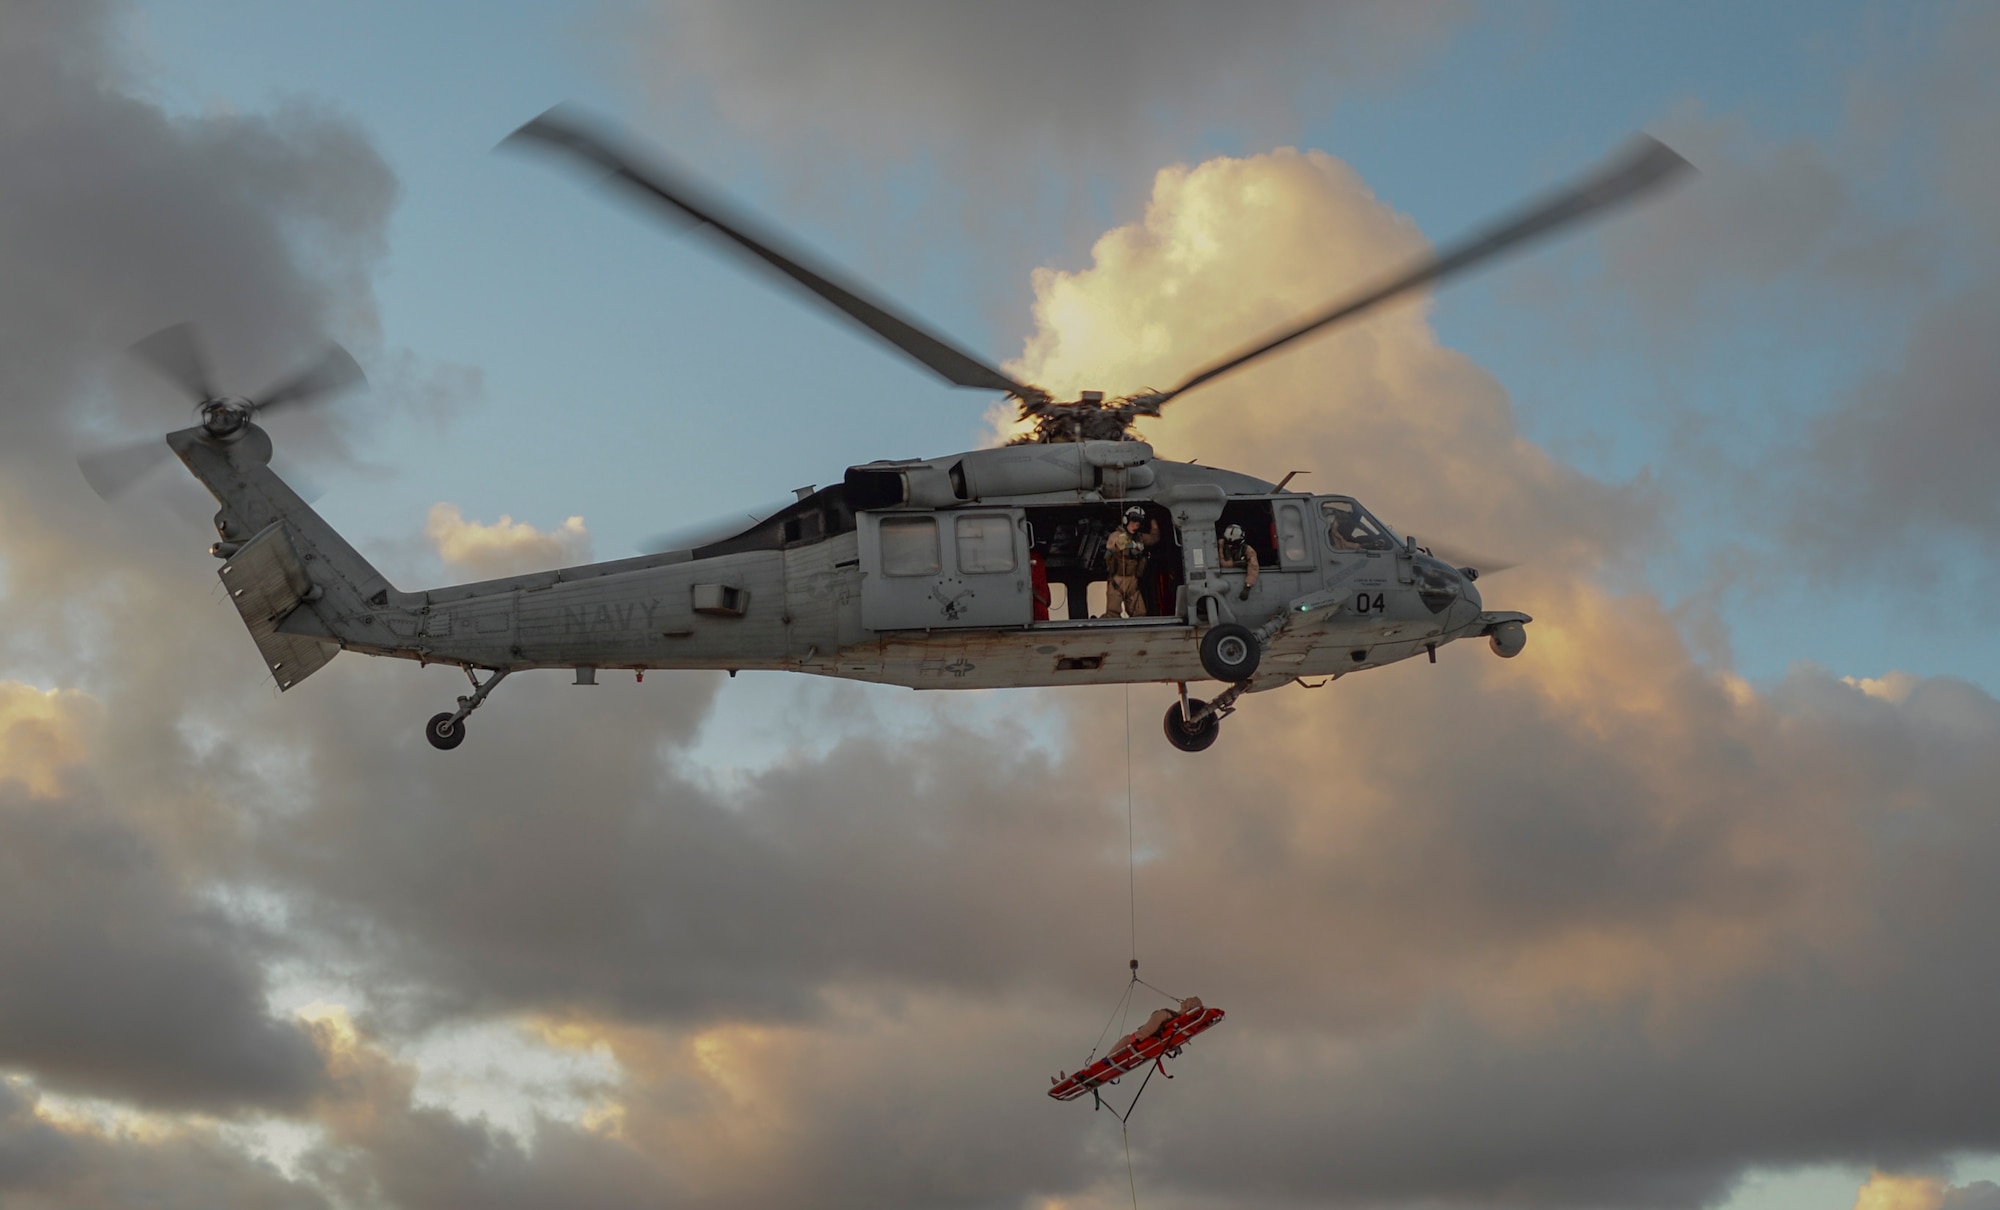 An MH-60S Sea Hawk helicopter assigned to the Island Knights of Helicopter Sea Combat Squadron (HSC) 25 conducts a training flight June 15, 2016, at Andersen Air Force Base, Guam. HSC-25 maintains a 24-hour search and rescue and medical evacuation alert posture, directly supporting the U.S. Coast Guard, Sector Guam and Joint Region Marianas. HSC-25 ensures maritime peace and security in the U.S. 7th Fleet area of responsibility. (U.S. Air Force photo by Tech. Sgt. Richard Ebensberger)